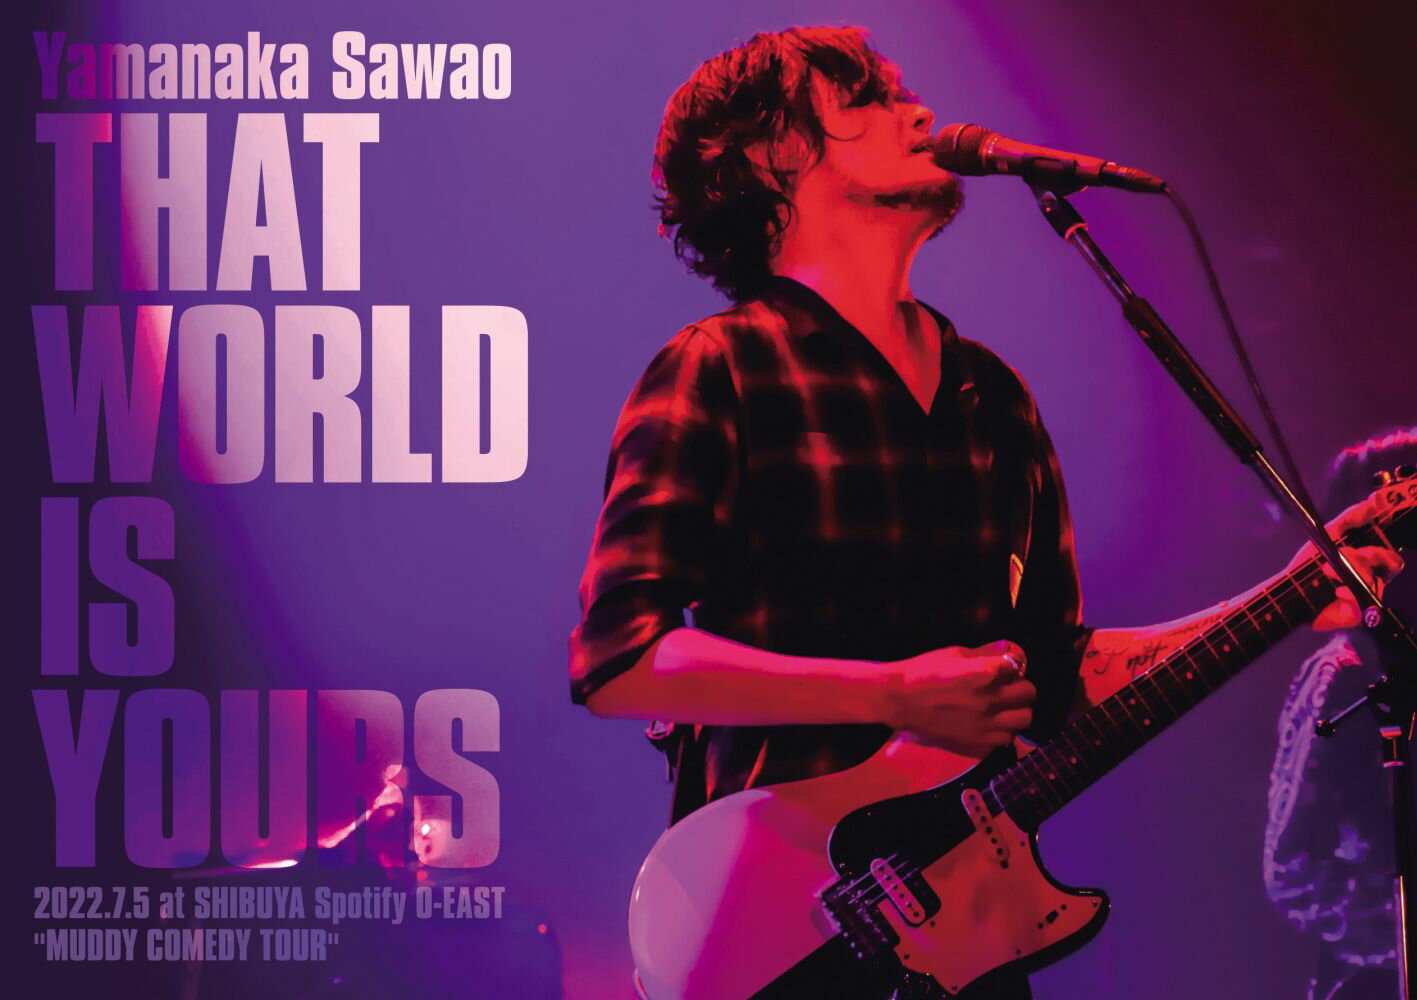 THAT WORLD IS YOURS 2022.7.5 at SHIBUYA Spotify O-EAST “MUDDY COMEDY TOUR"